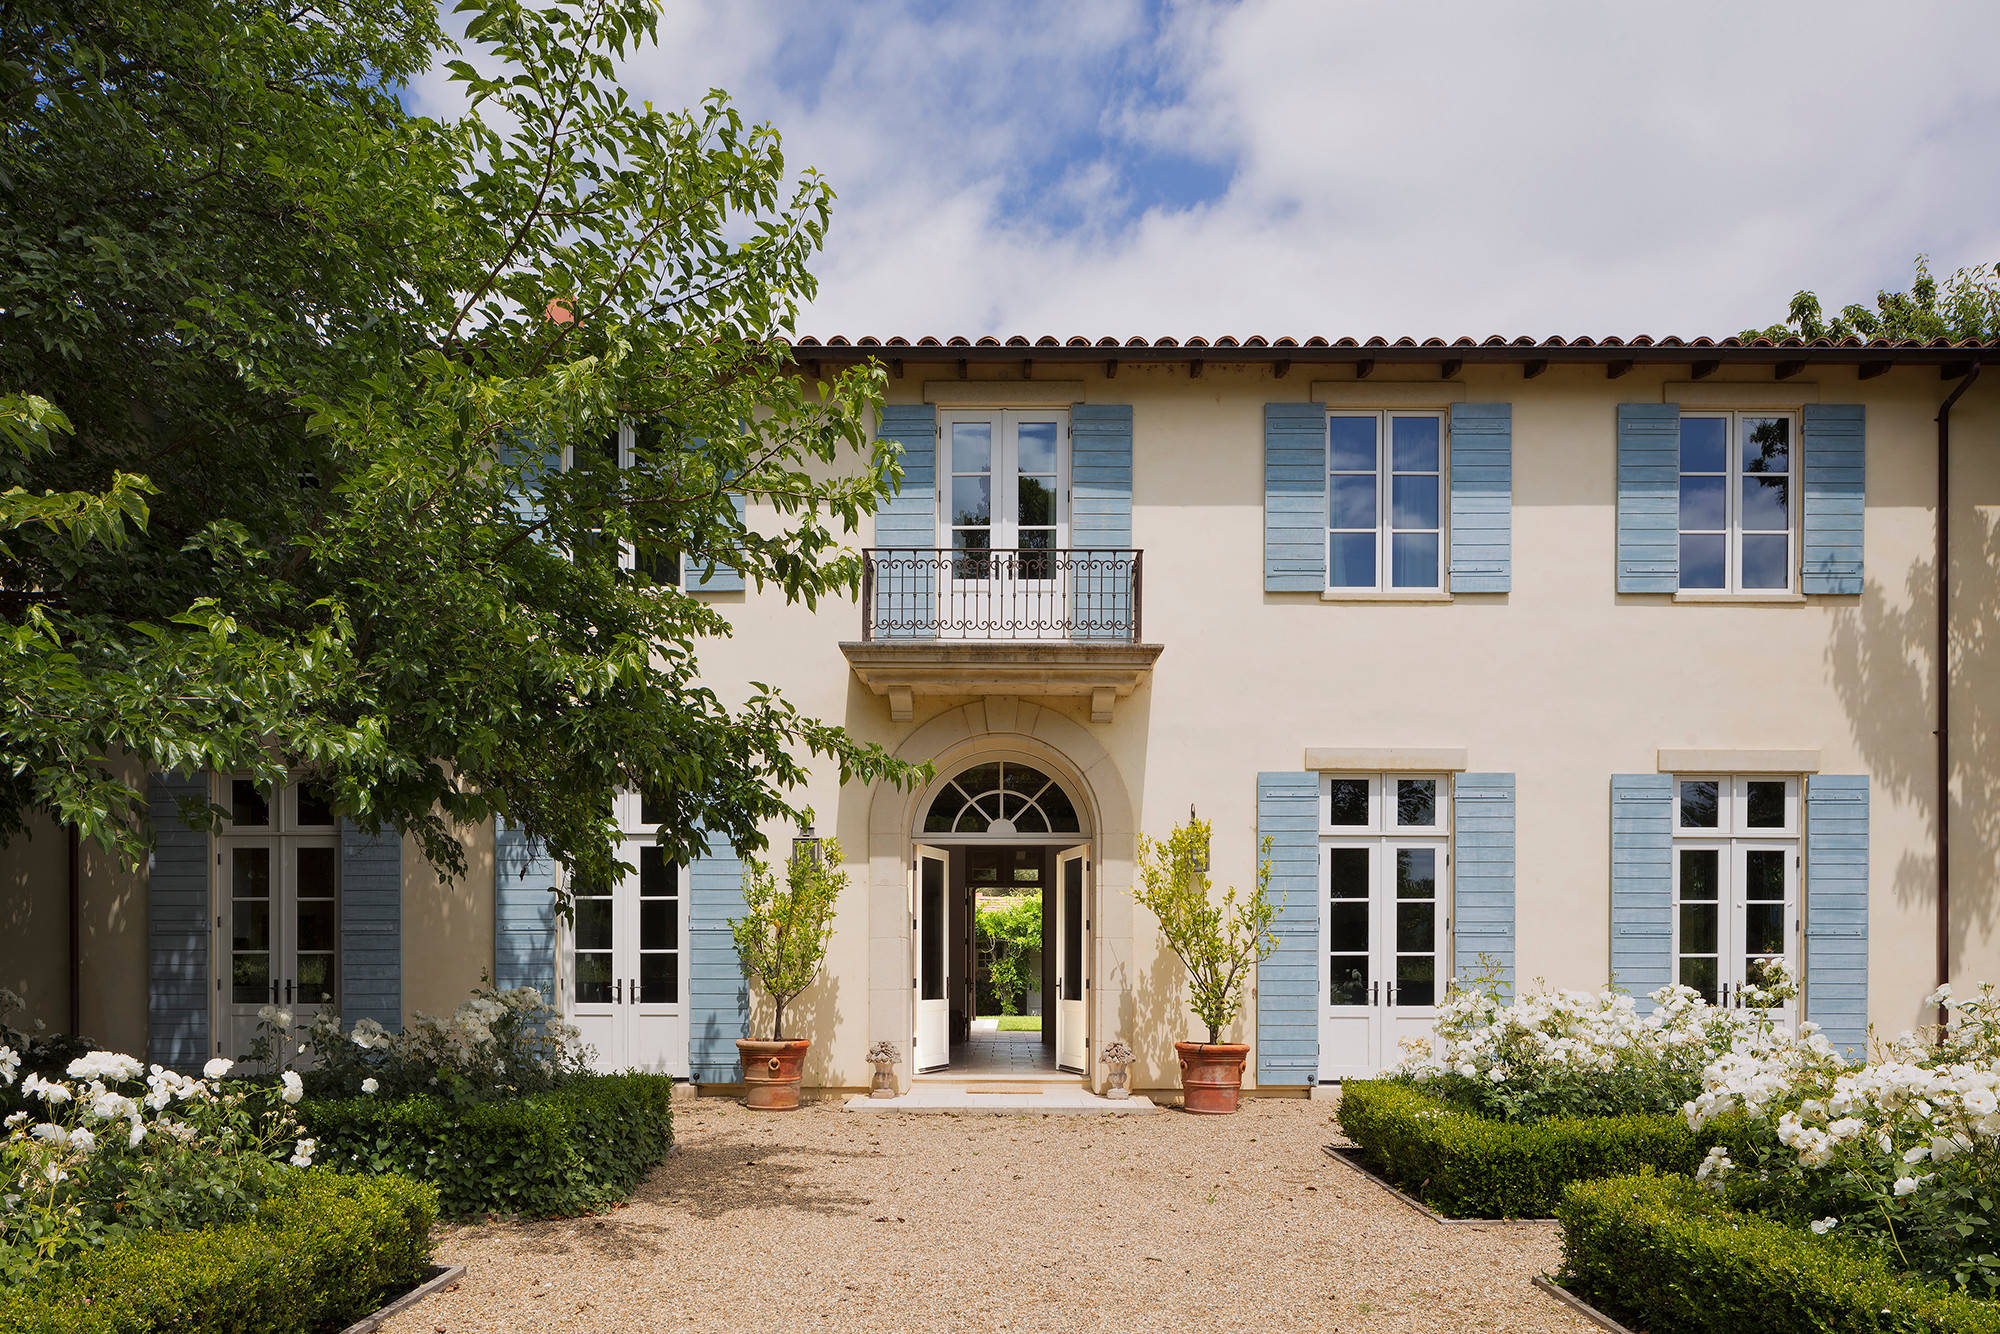 French Country Style Residence Michael Hospelt Photography Img~5ed131b2092dca73 14 5426 1 0ef7f46 